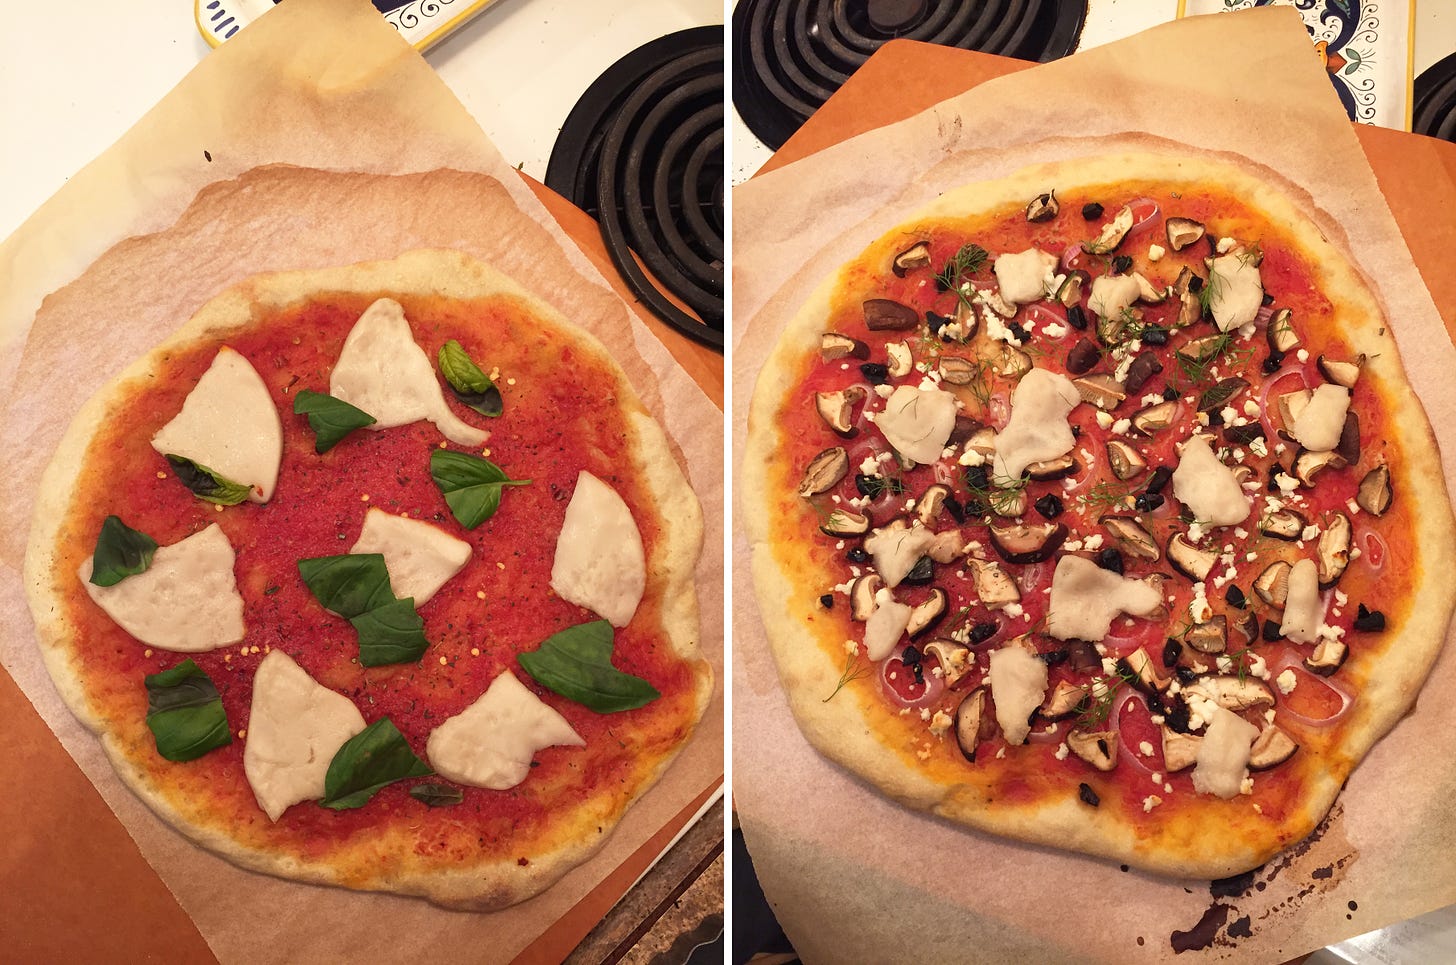 Left image: a vegan margherita pizza on a piece of parchment paper. Right image: a mushroom pizza with vegan mozza pieces and sprinkles of feta and black garlic, on top of a piece of parchment.